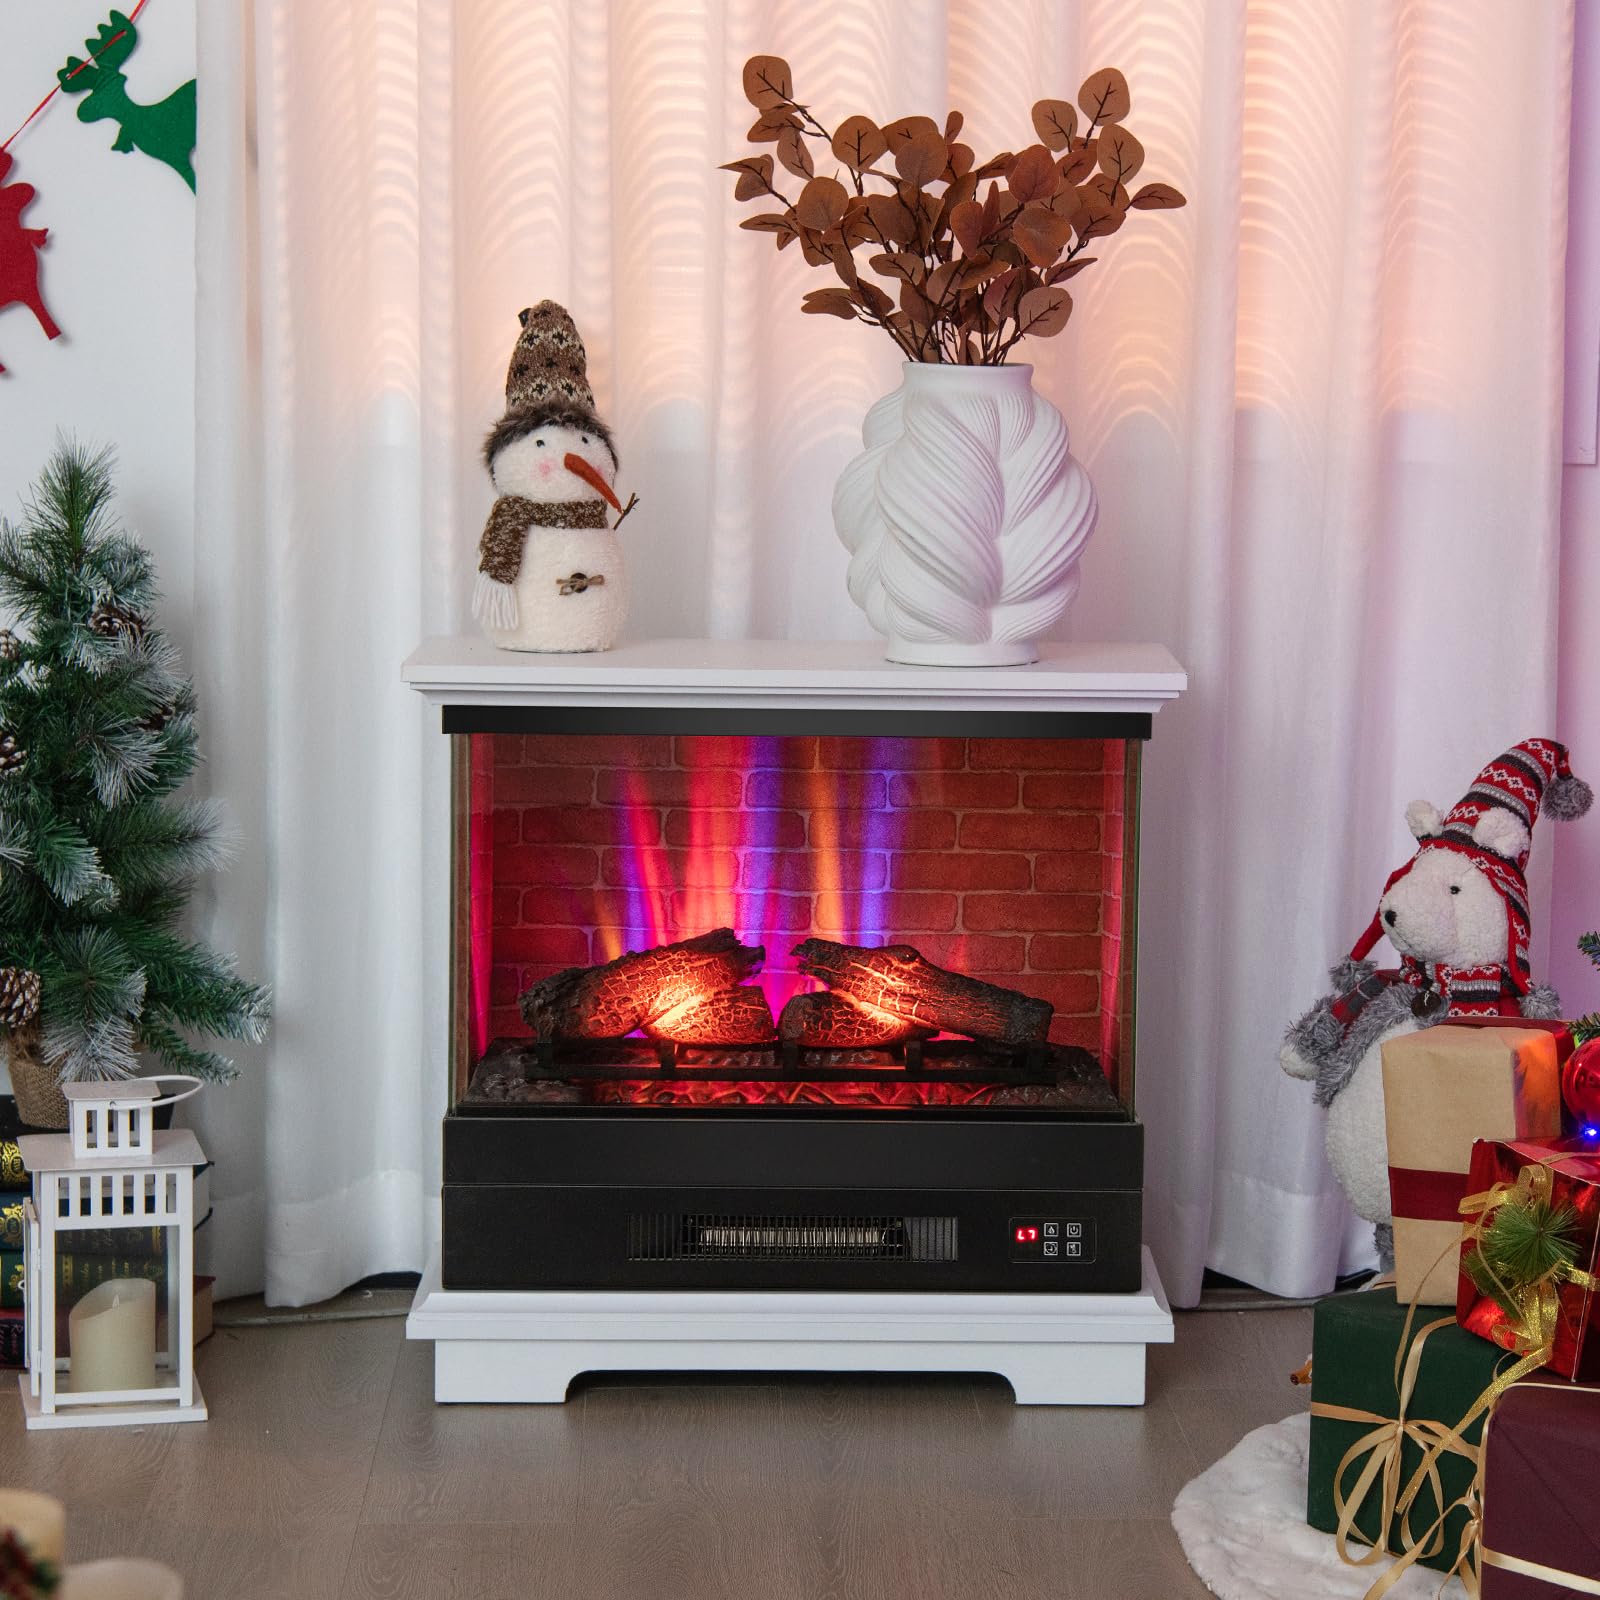 27 Inches Electric Fireplace Heater, White - Tangkula